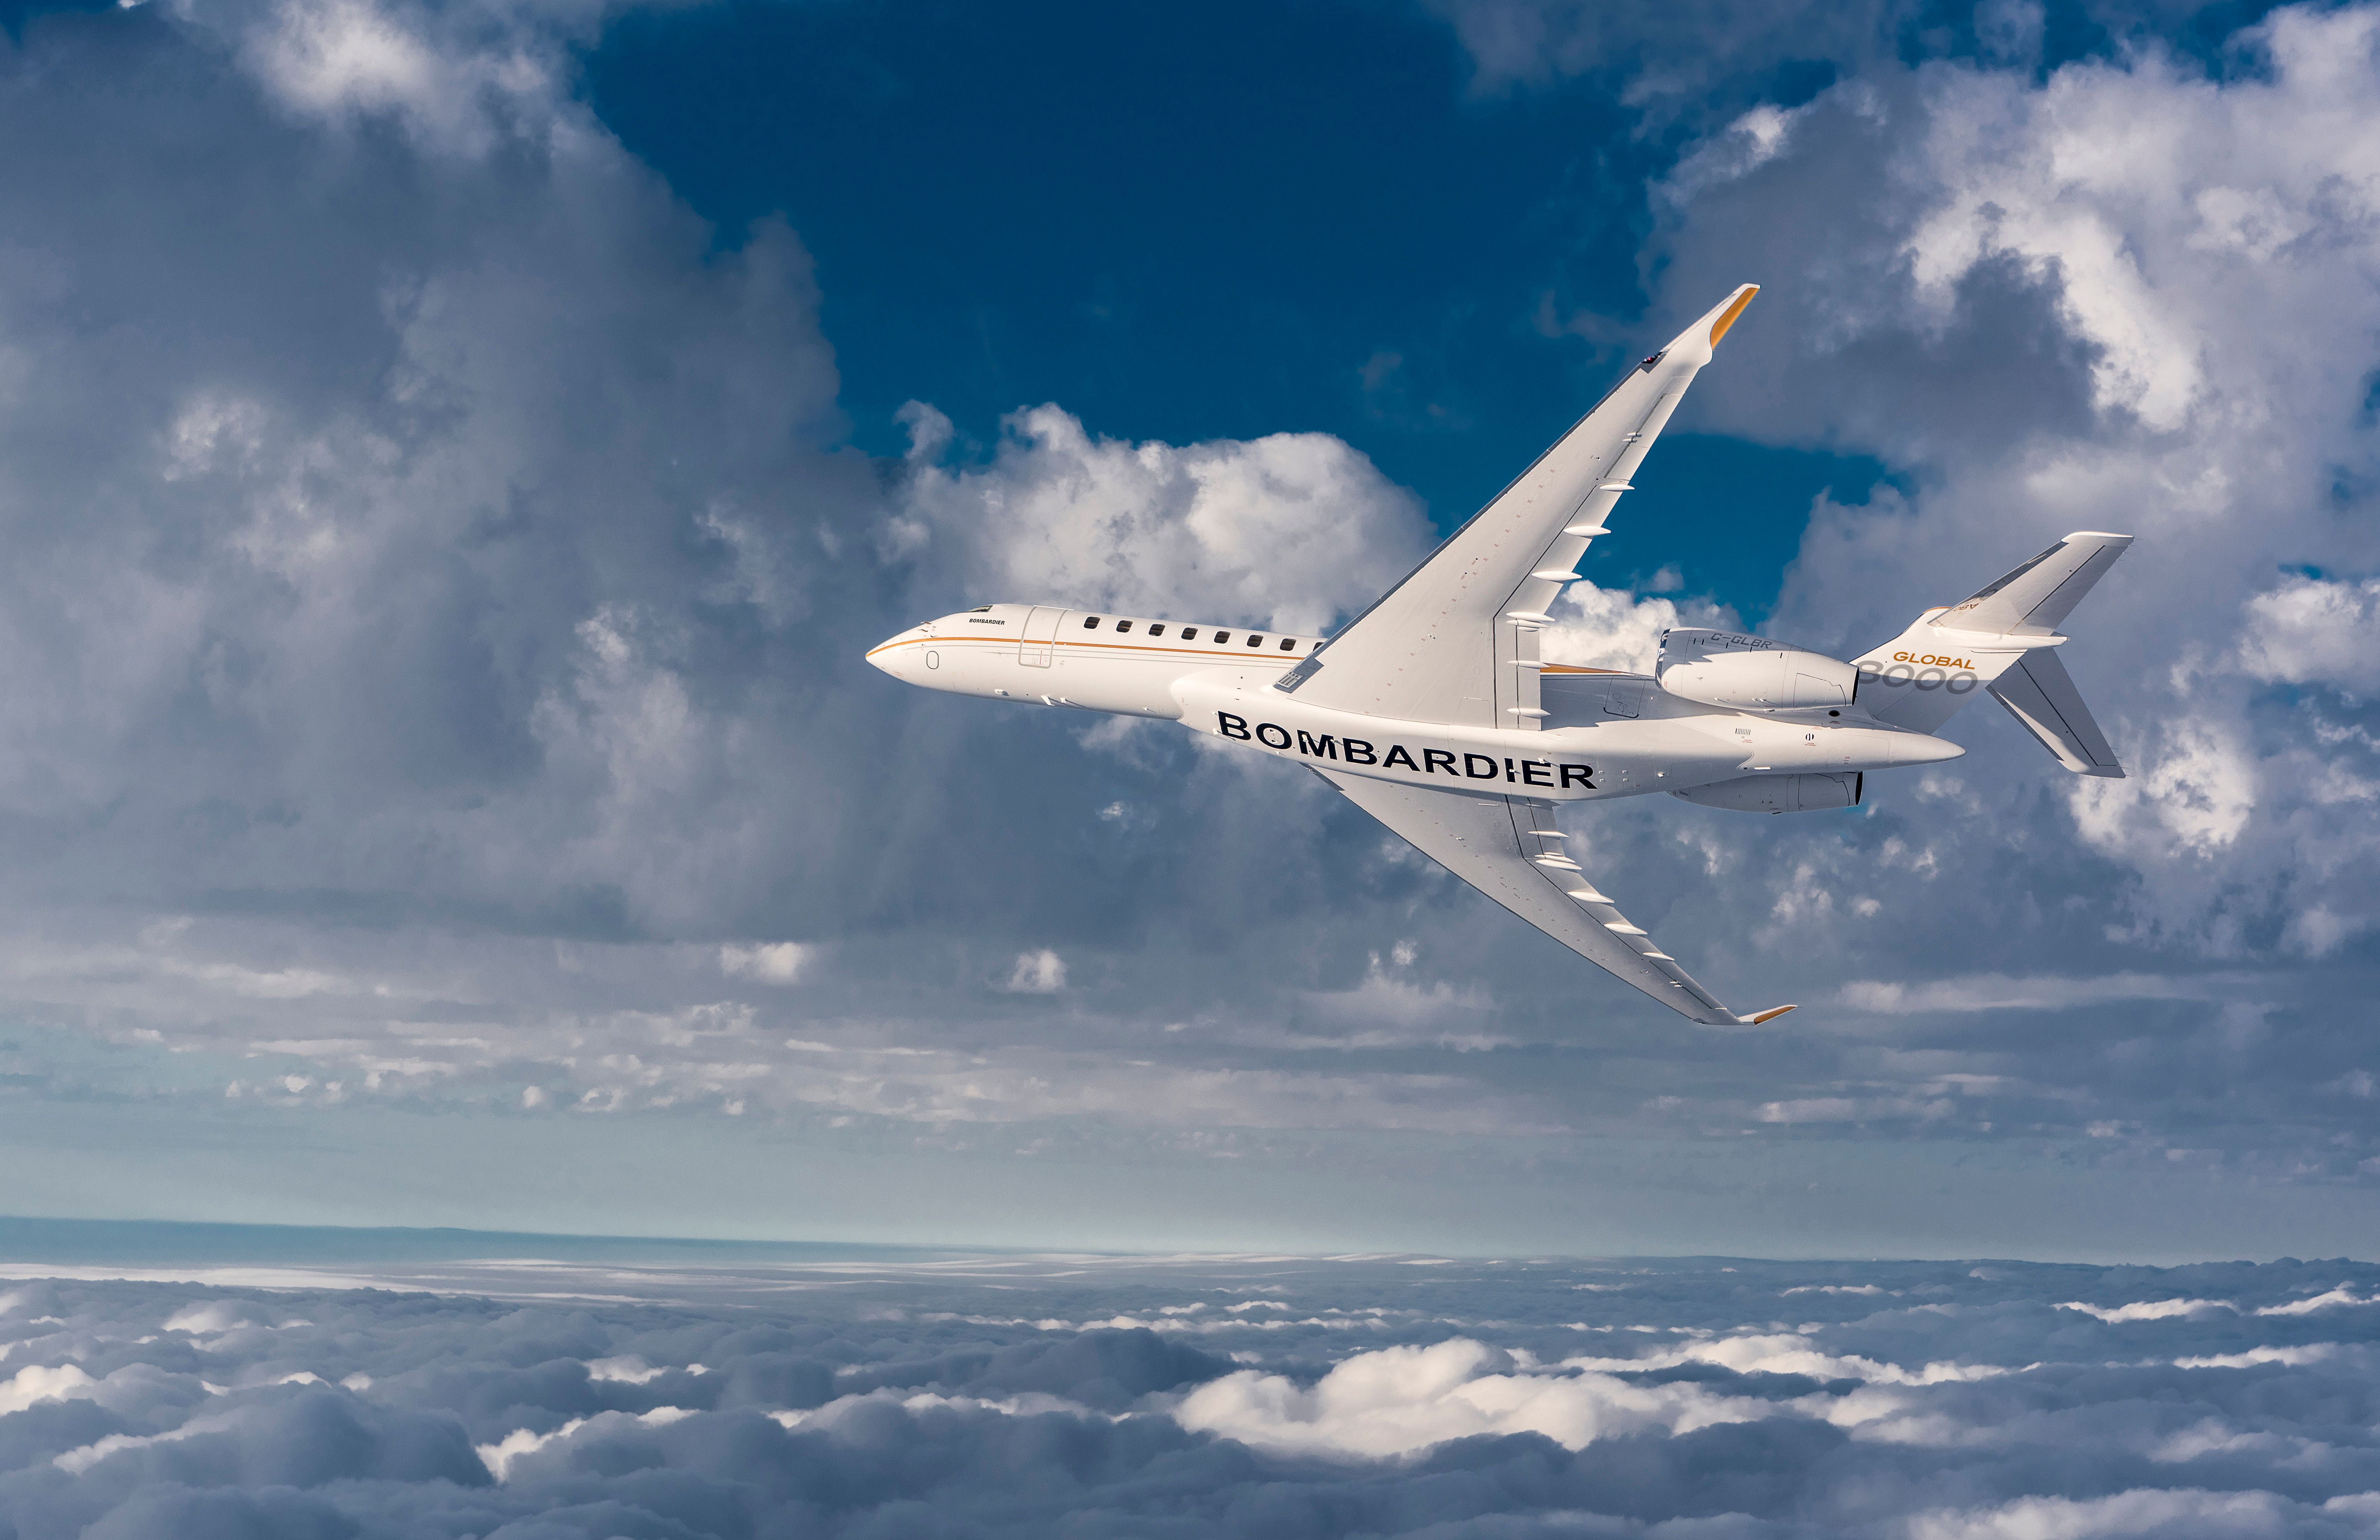 A Bombardier Global 8000 Flying above the clouds.